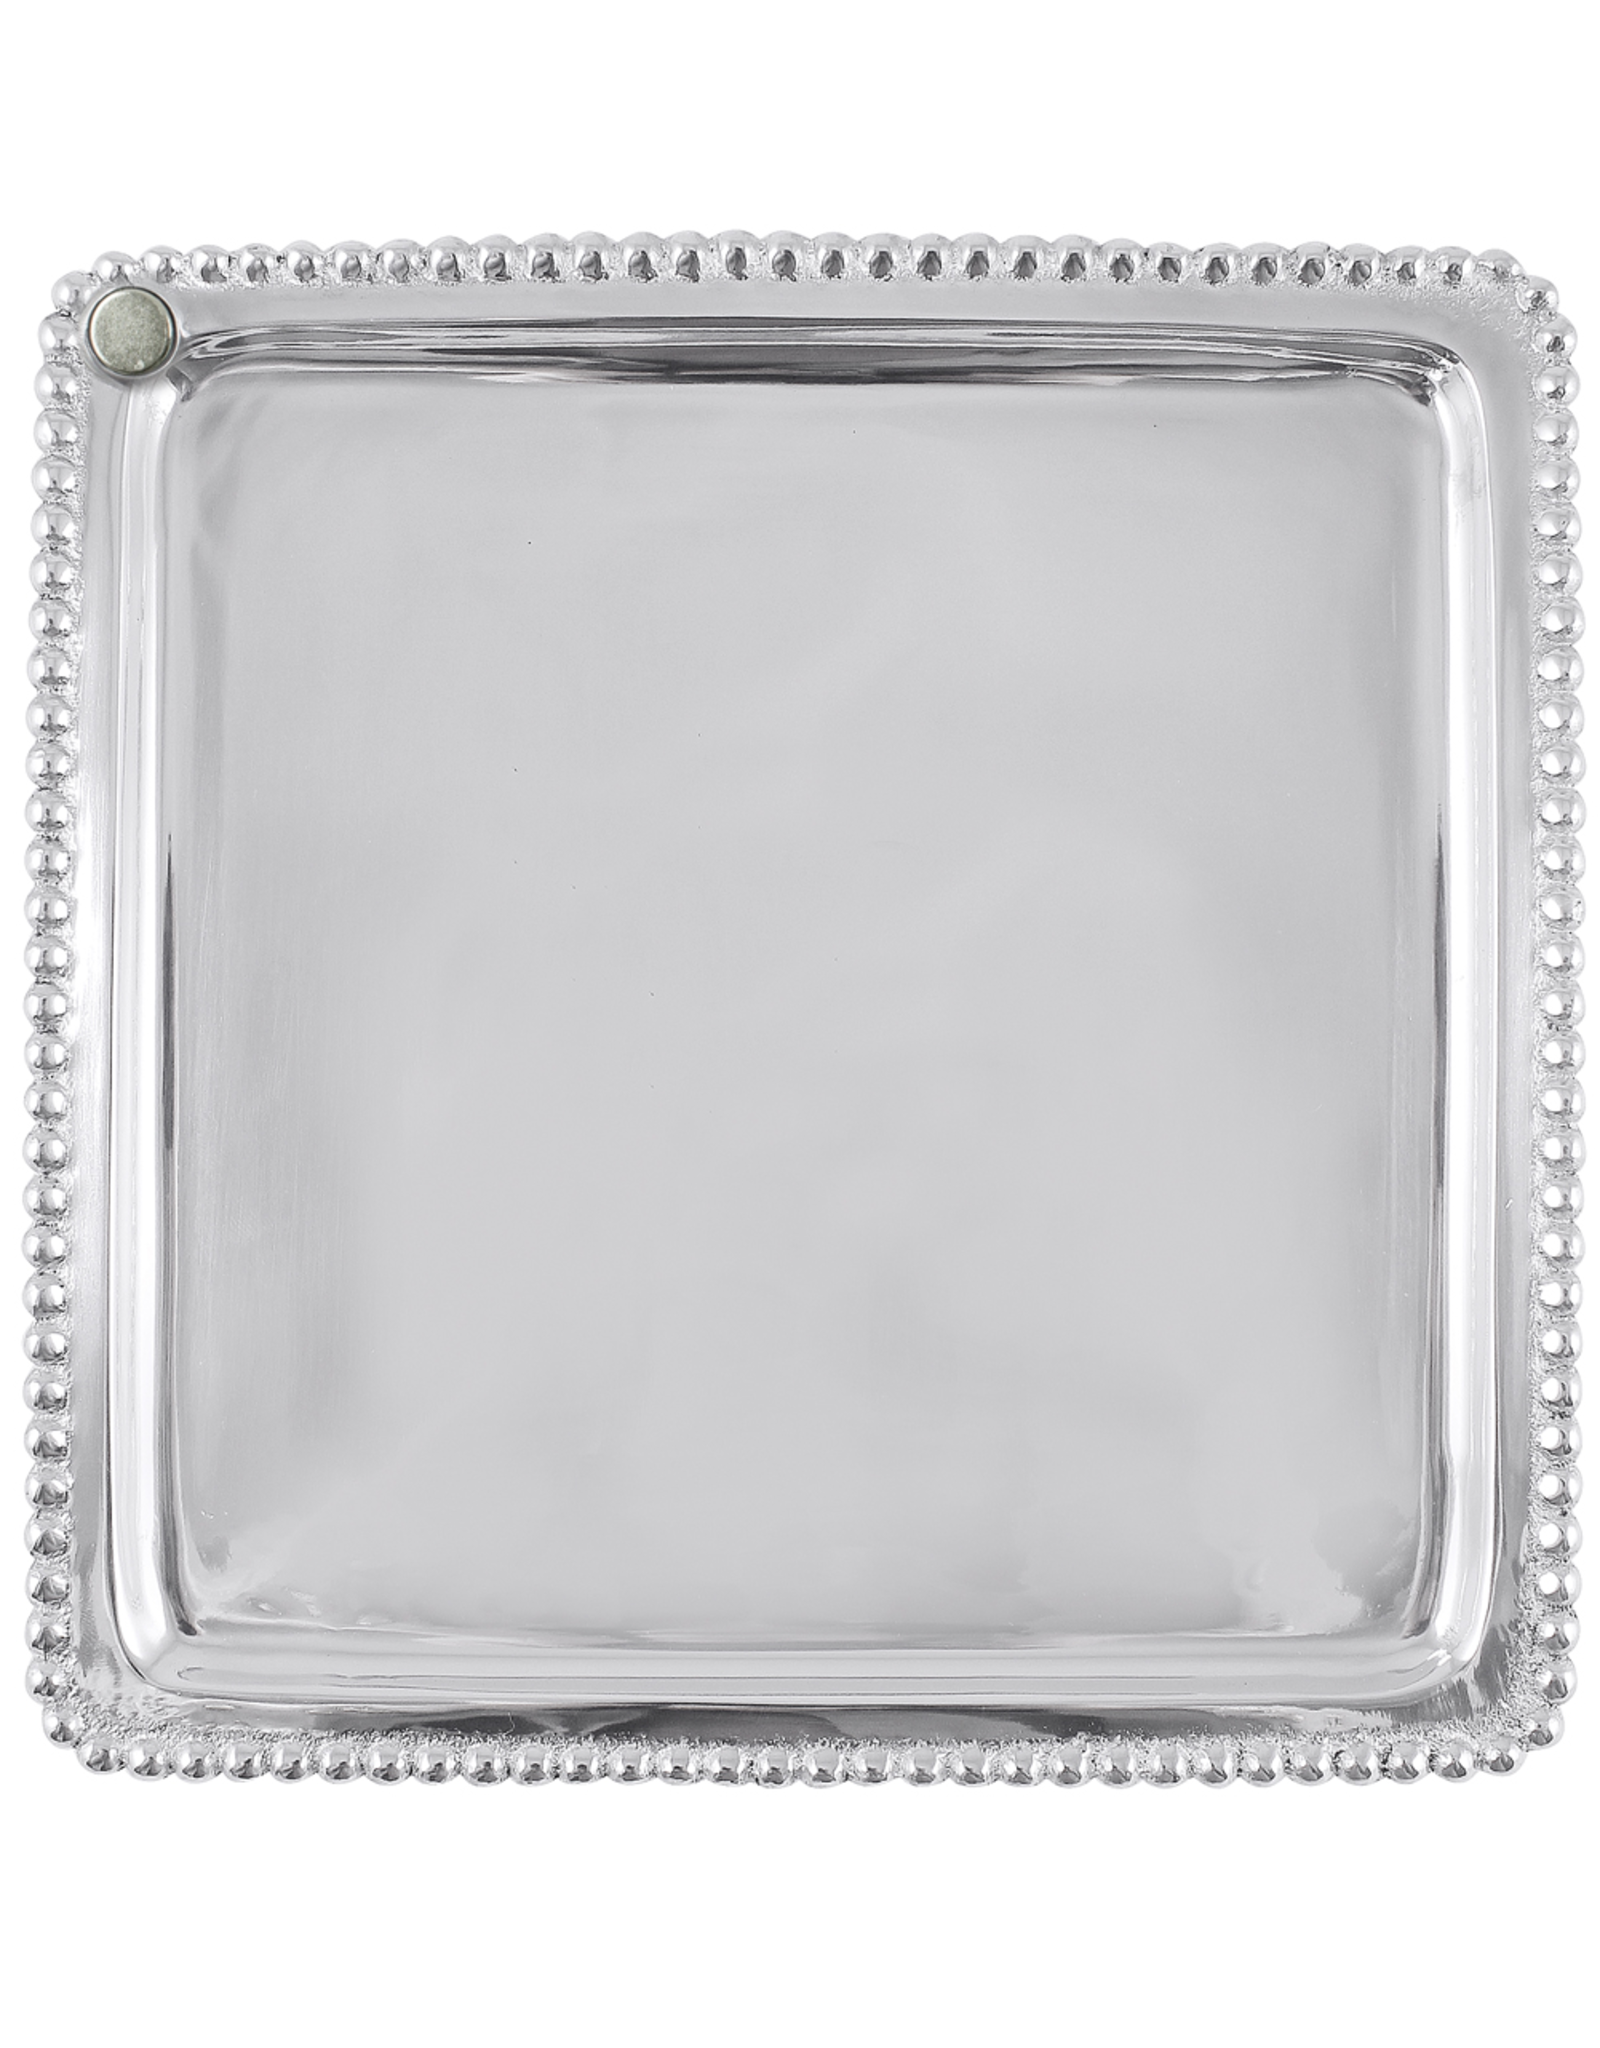 Mariposa Charms Collection 5538 Charms Small Beaded Square Plate